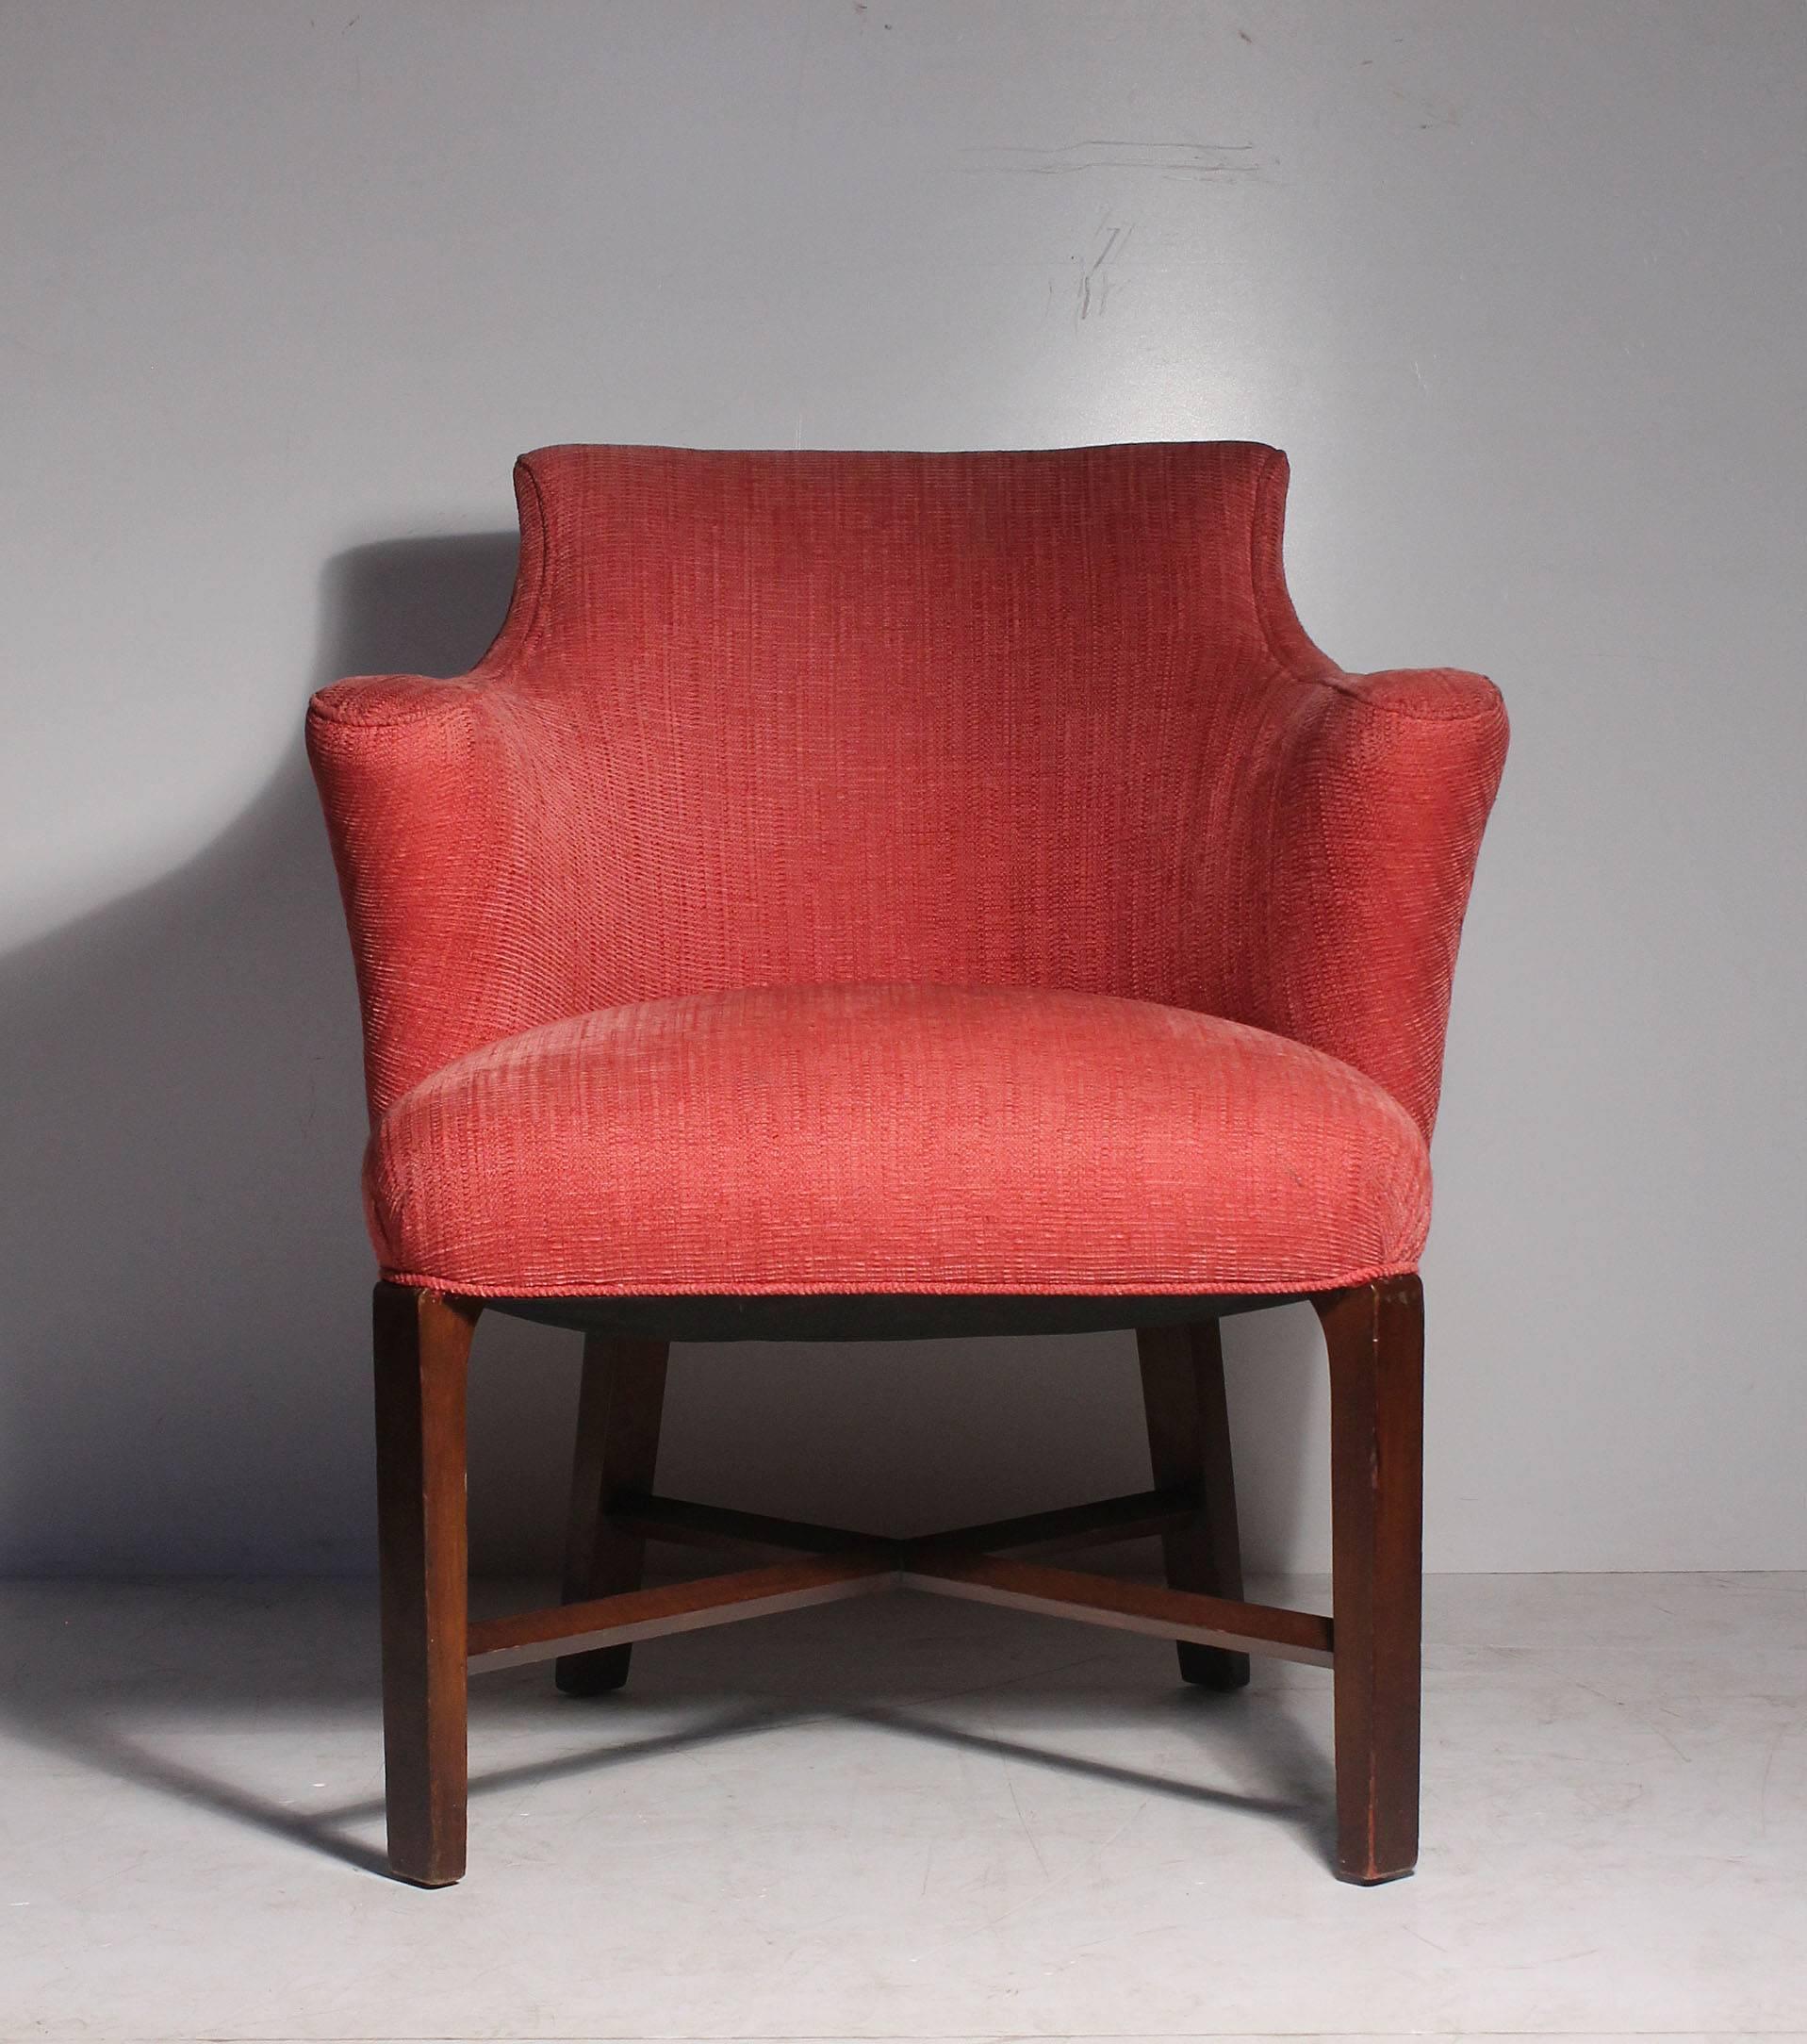 20th Century Syrie Maugham Armchairs - 4 Chairs available - Hollywood Regency